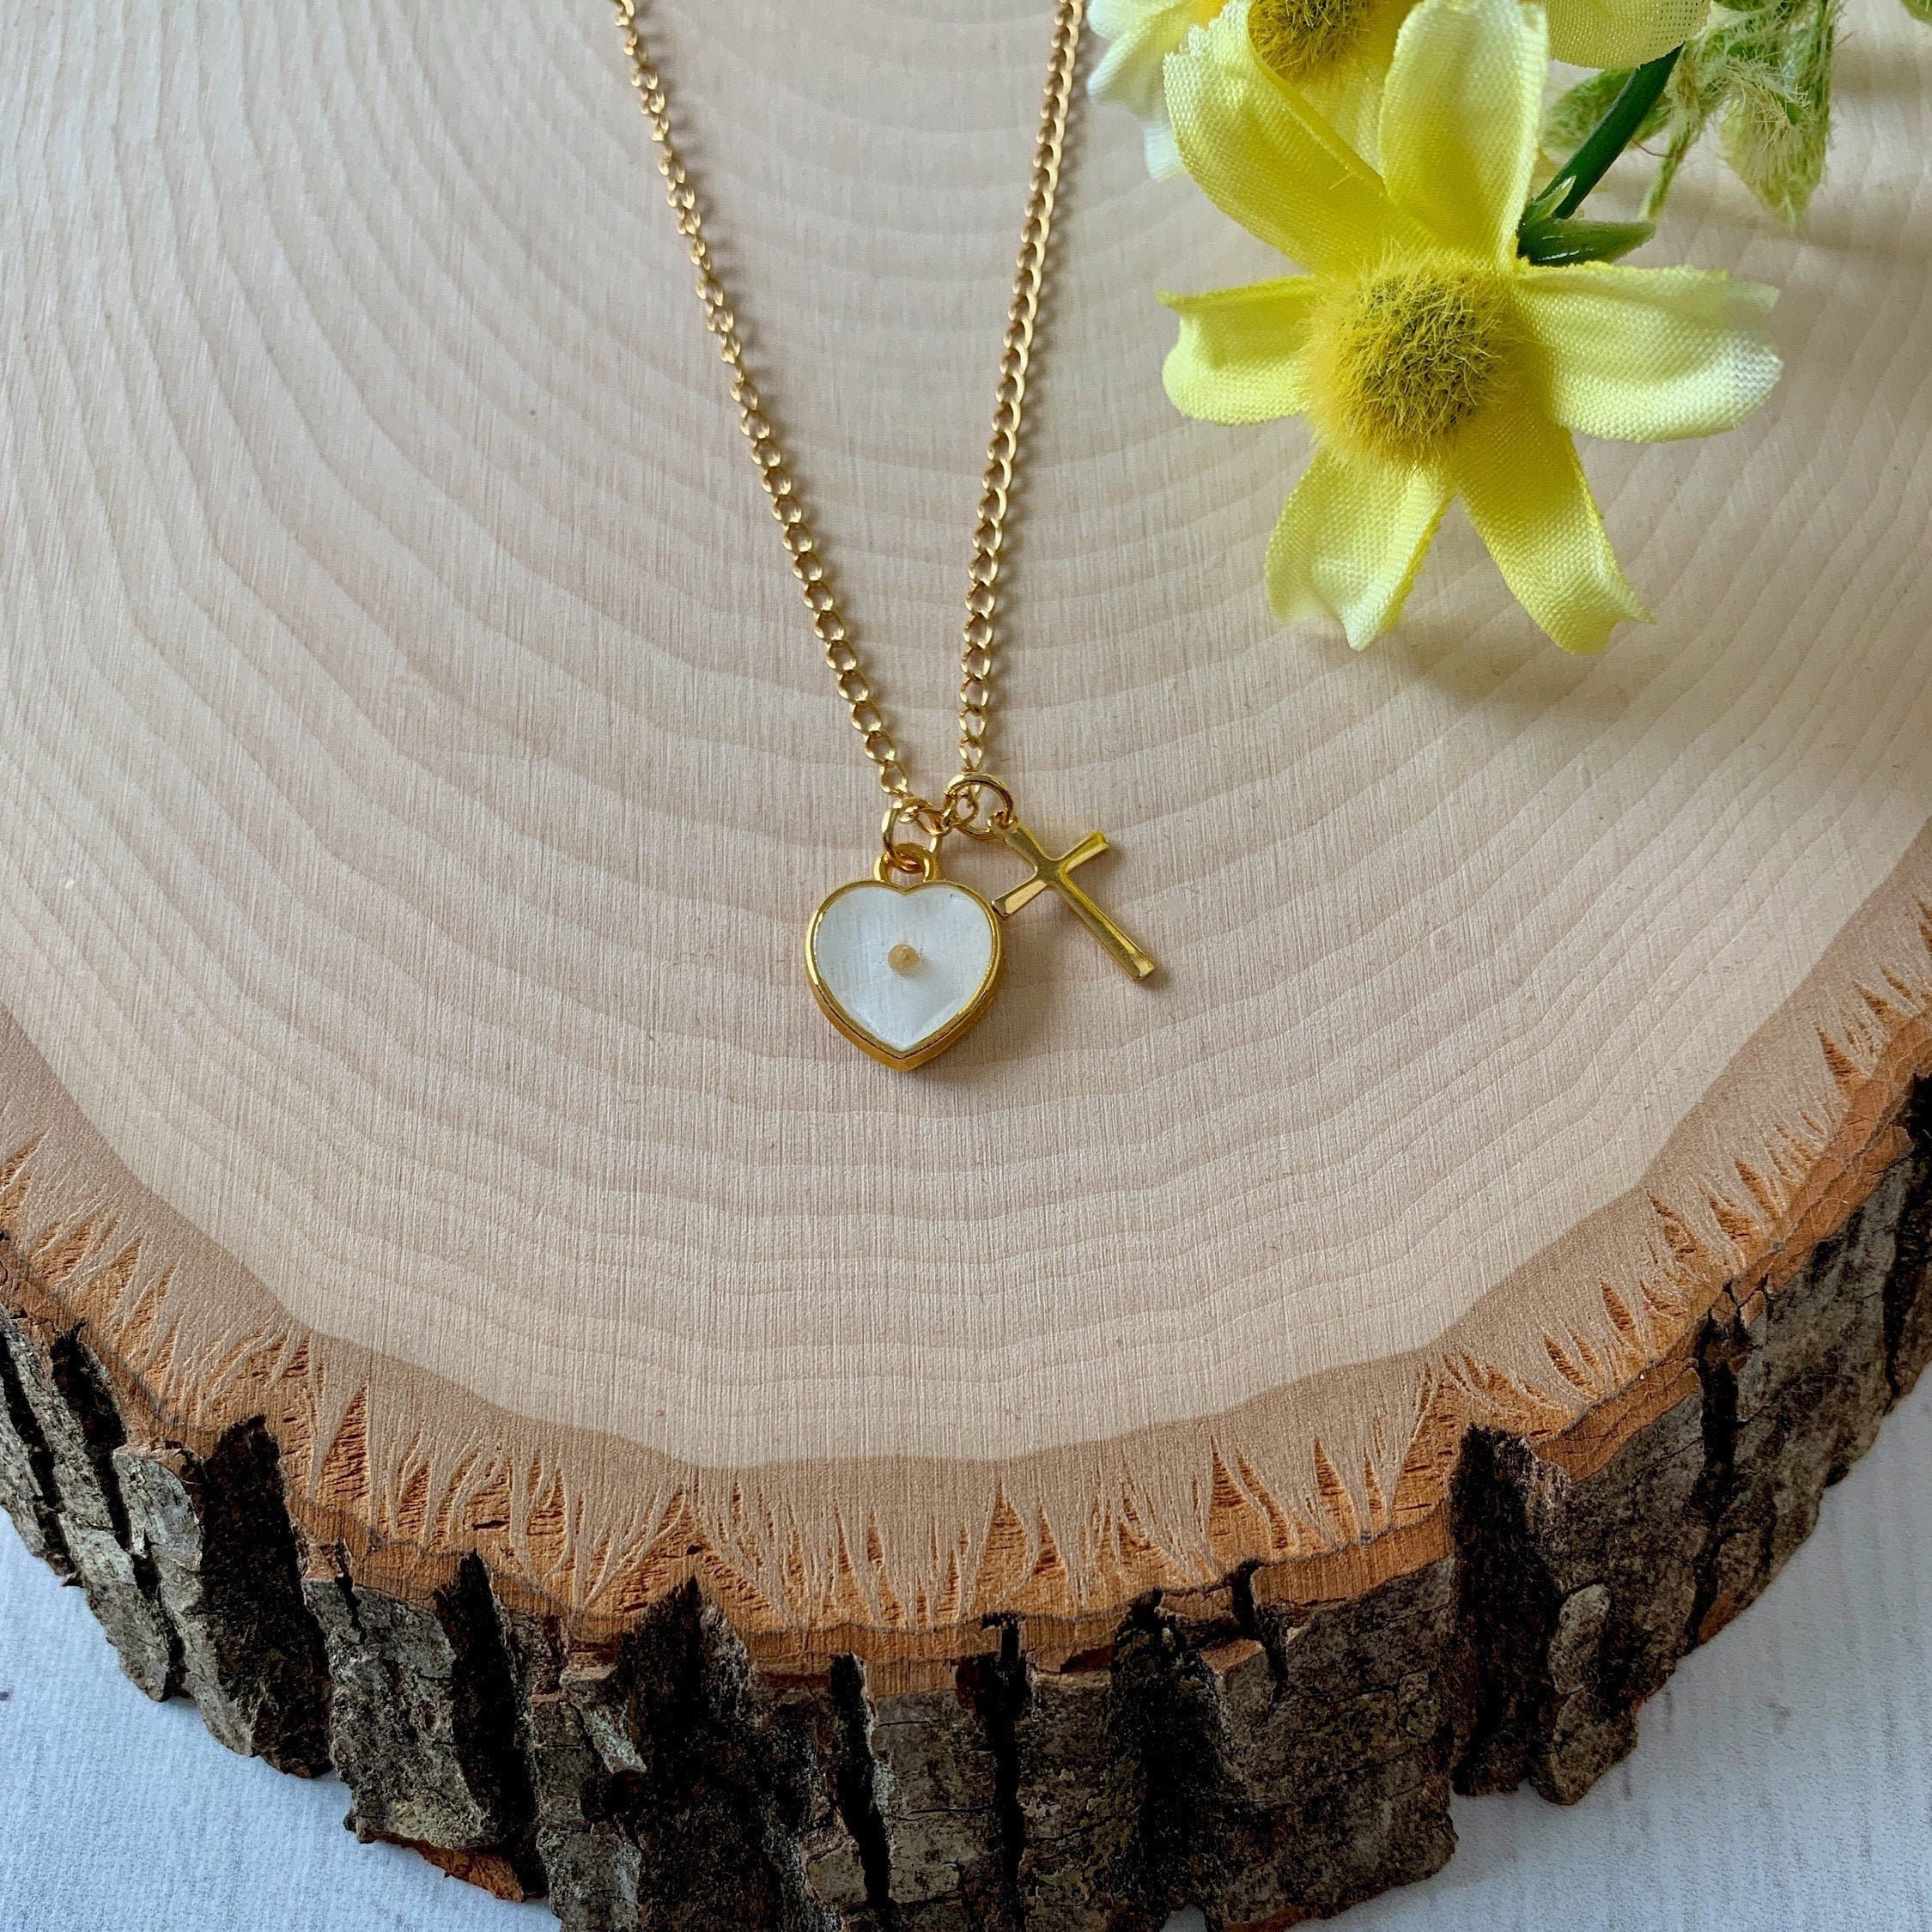 Gold Mustard Seed Necklace - Faith Necklace - Christian Women Gifts - Matthew 17 20 - Christian Jewelry - 24K Gold - Faith Based Gifts